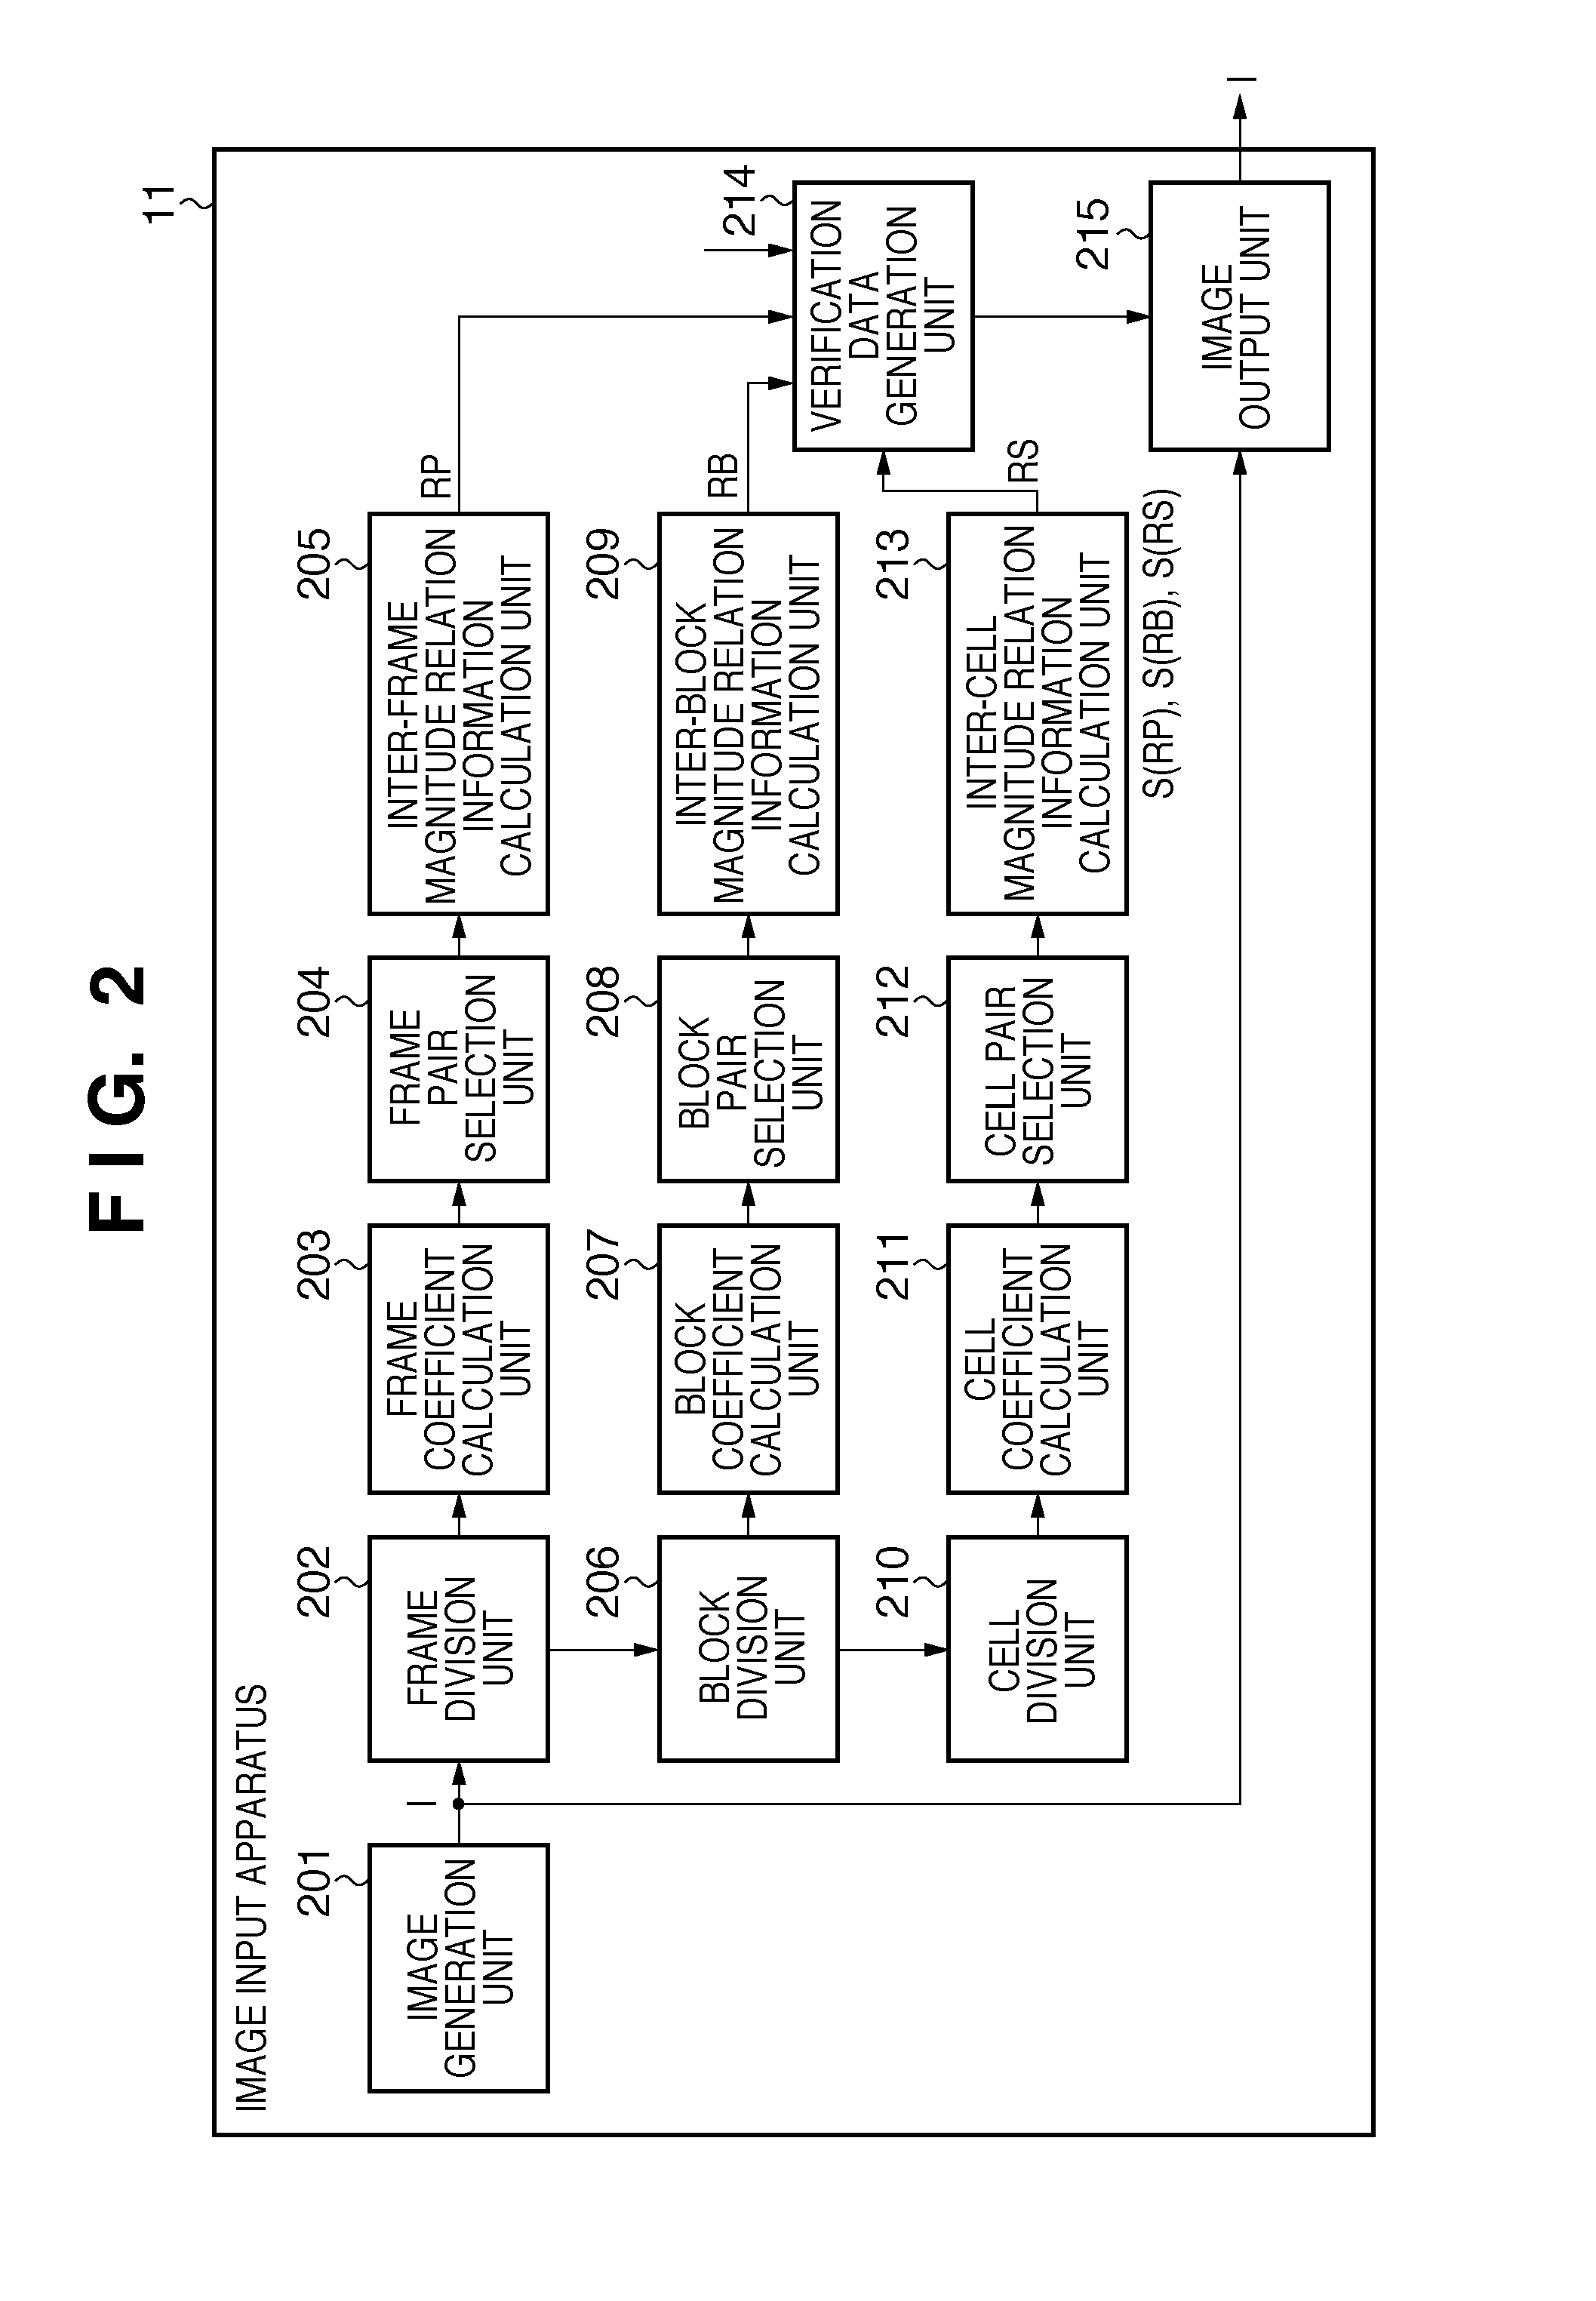 Information processing apparatus, verification apparatus, and methods of controlling the same